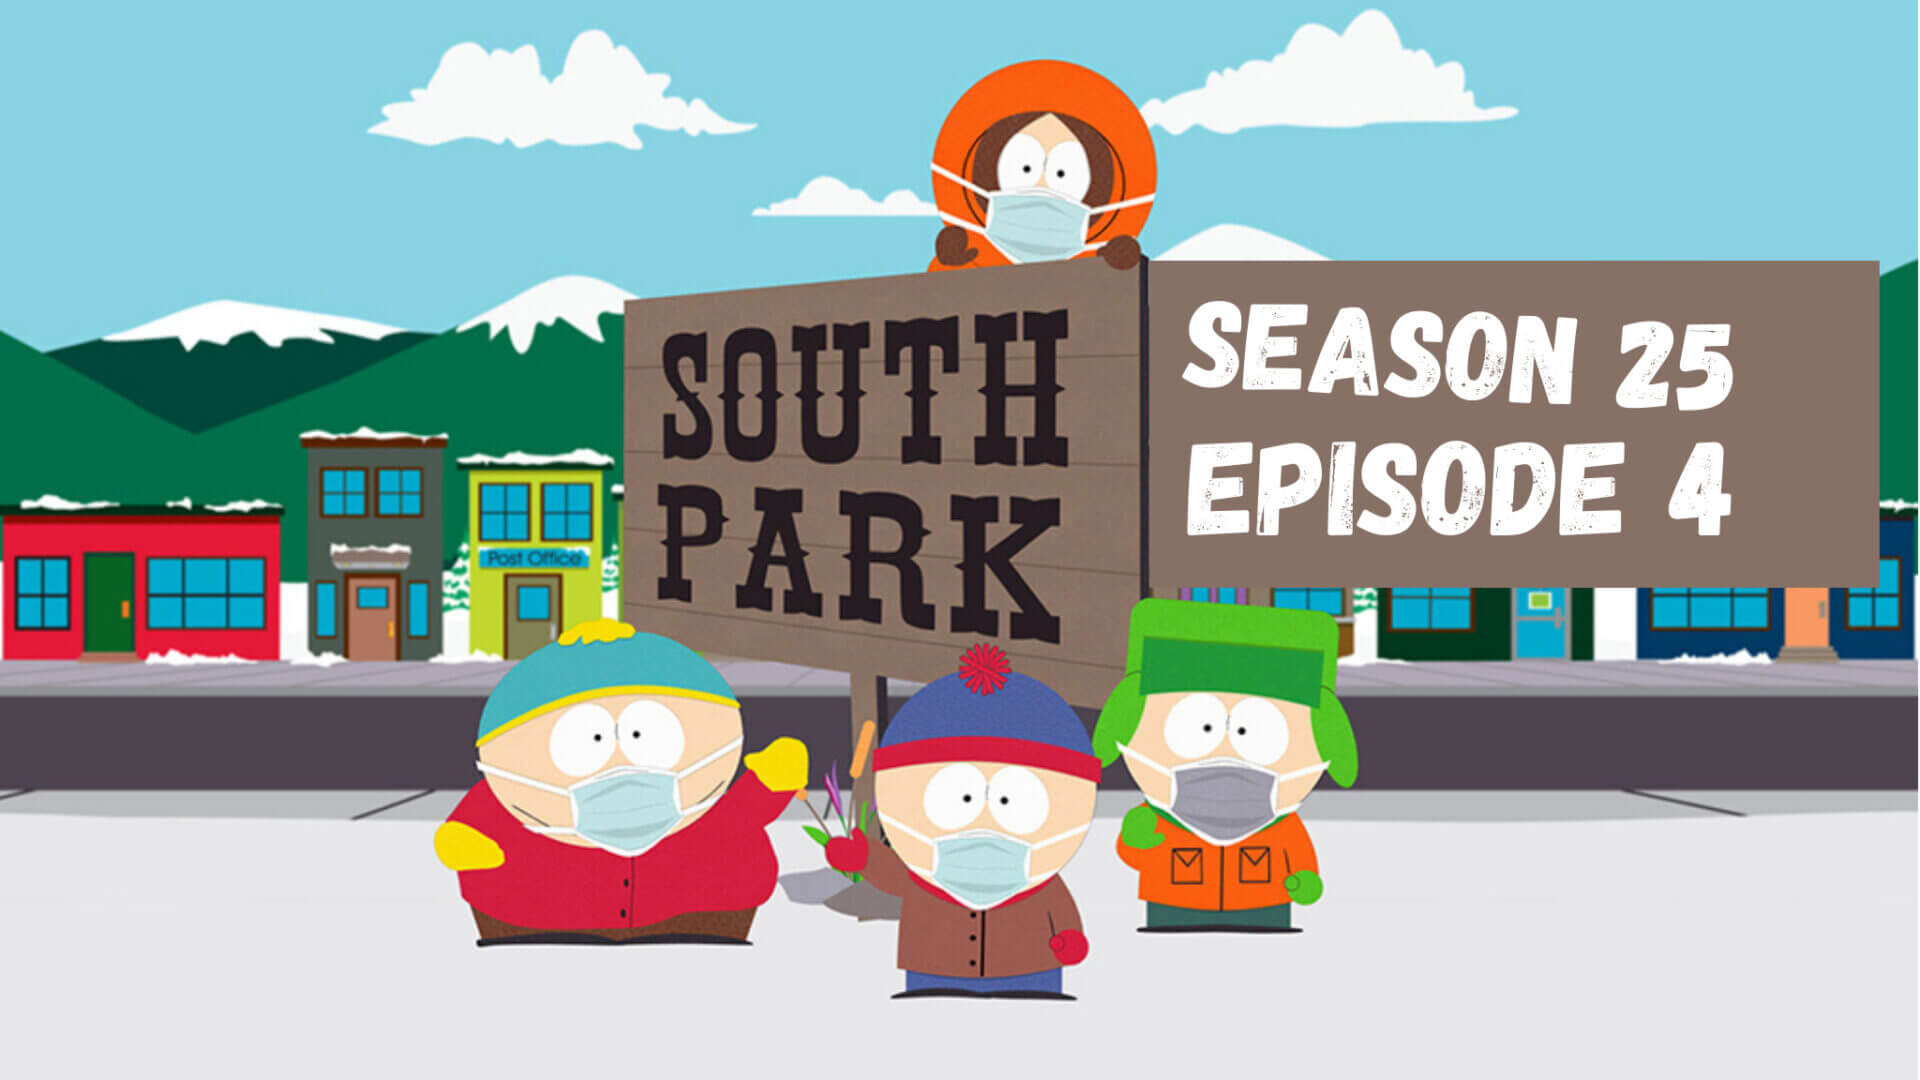 When is South Park Season 25 Episode 4 Coming Out (Release Date)